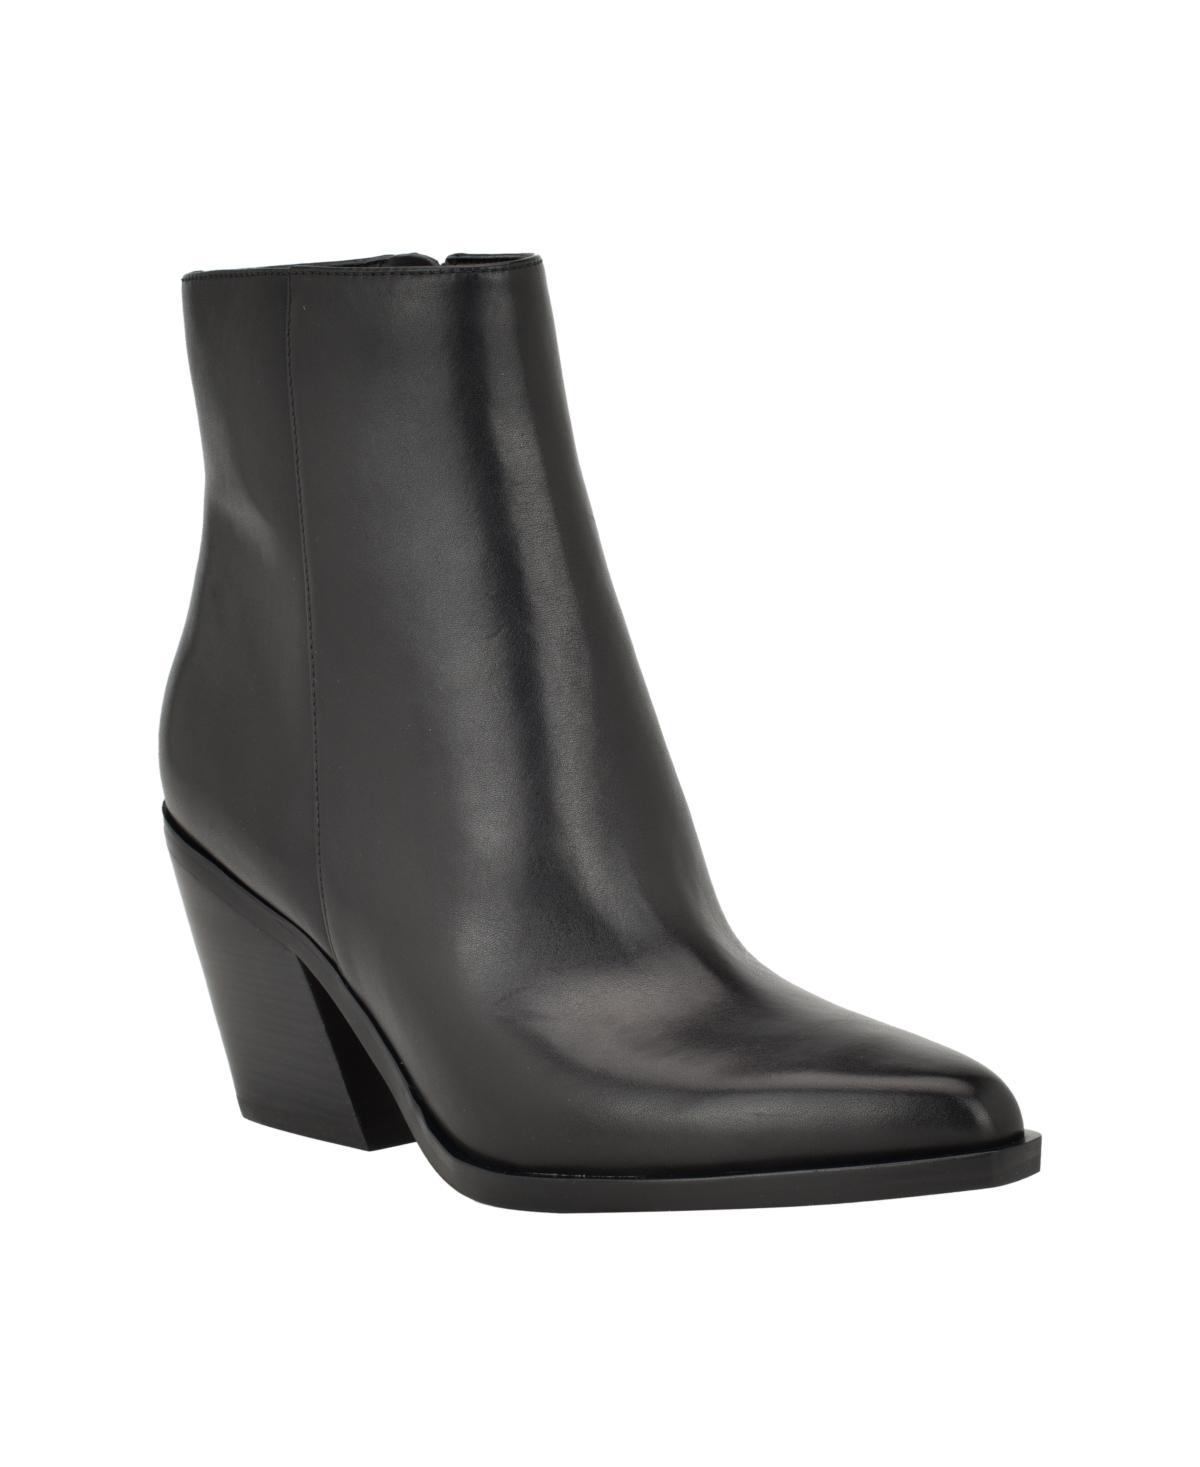 Calvin Klein Fallone Bootie Product Image